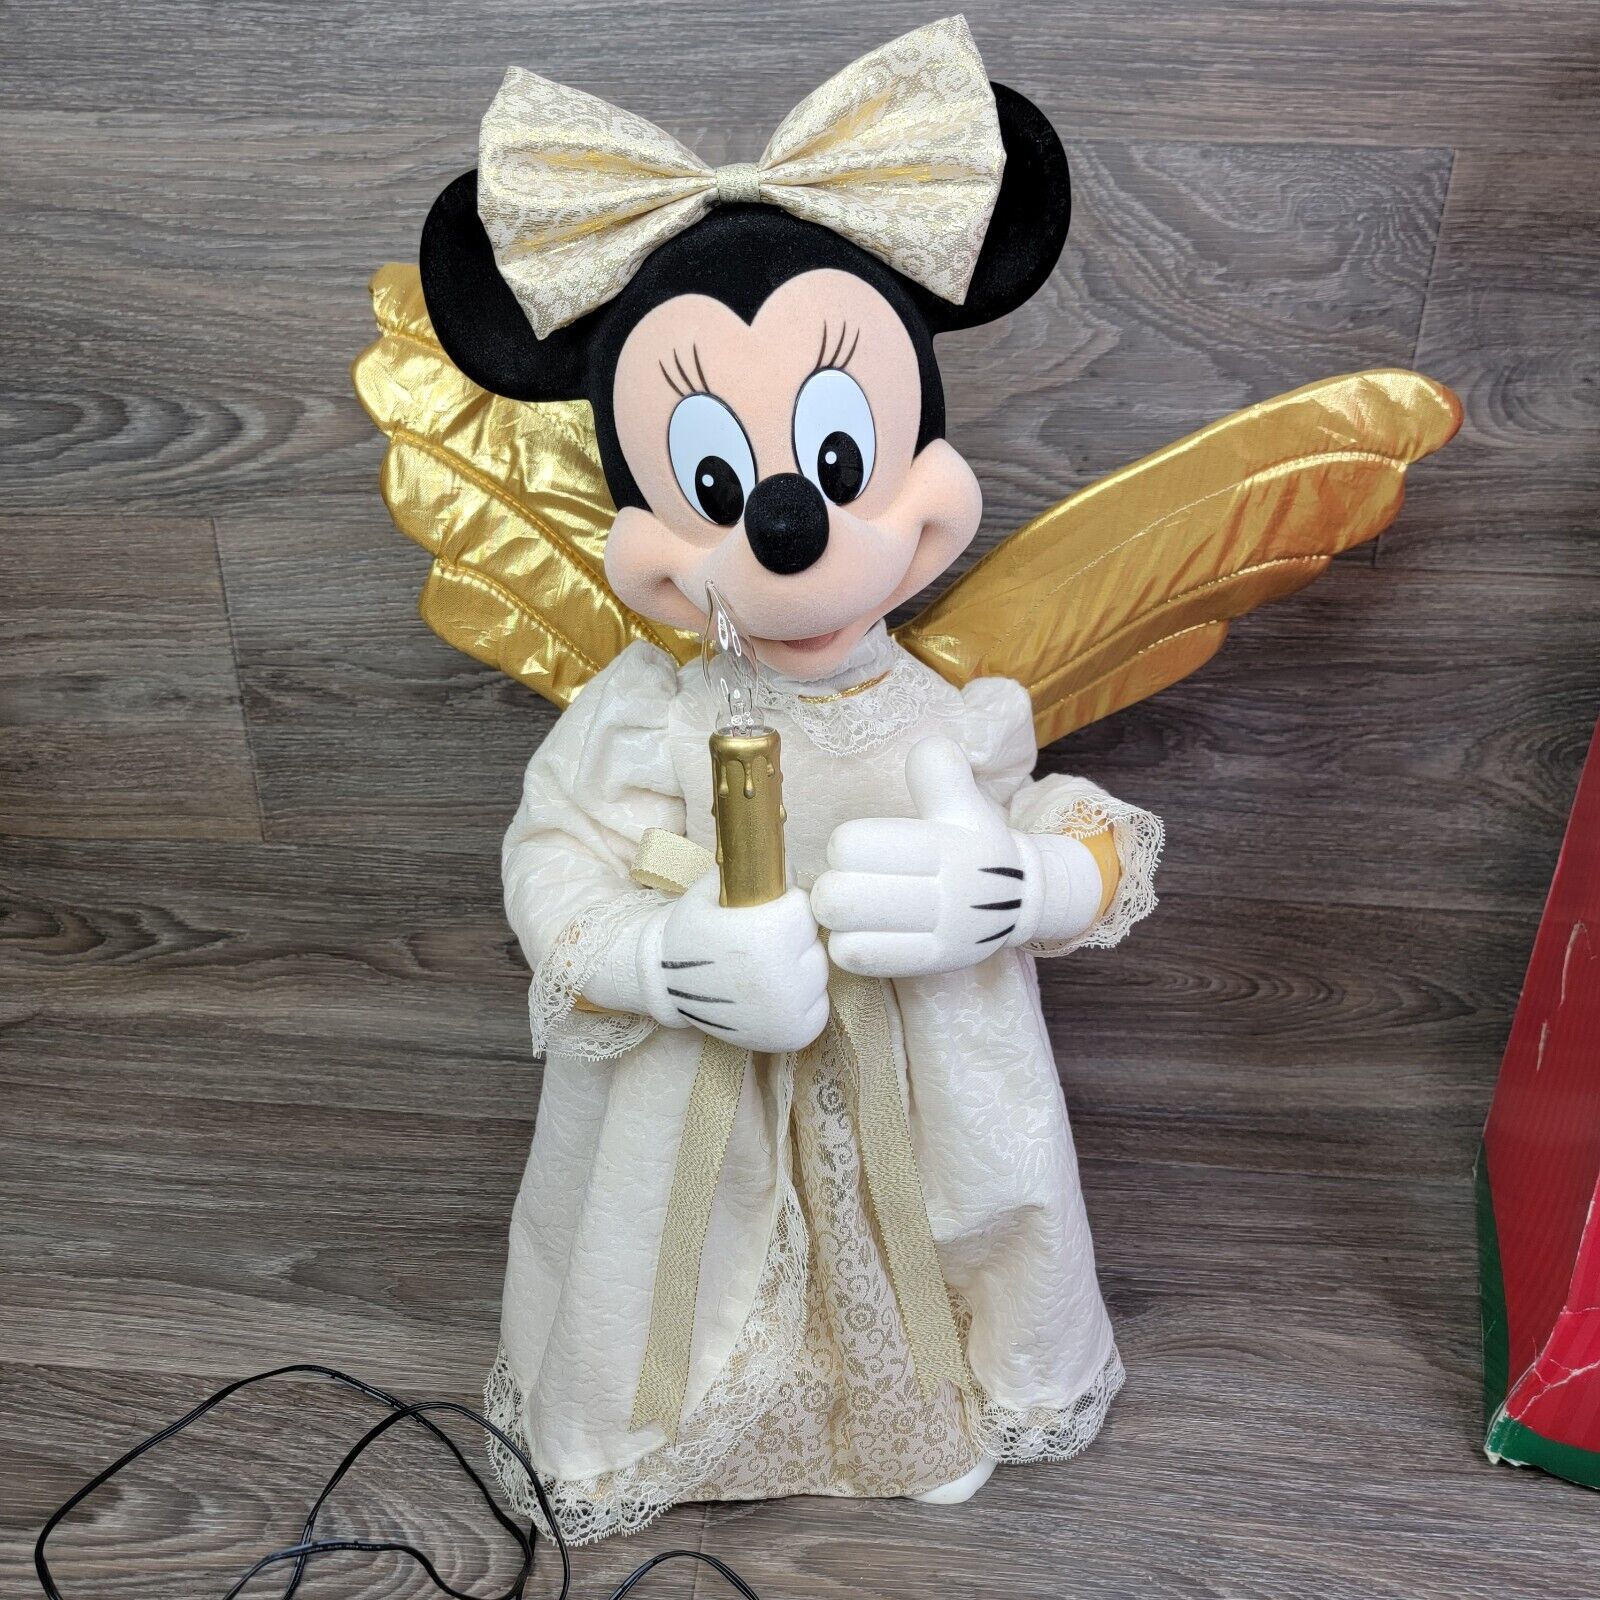 Telco Minnie Mouse Season of Song 1997 Animated Figurine Holiday Large Vintage